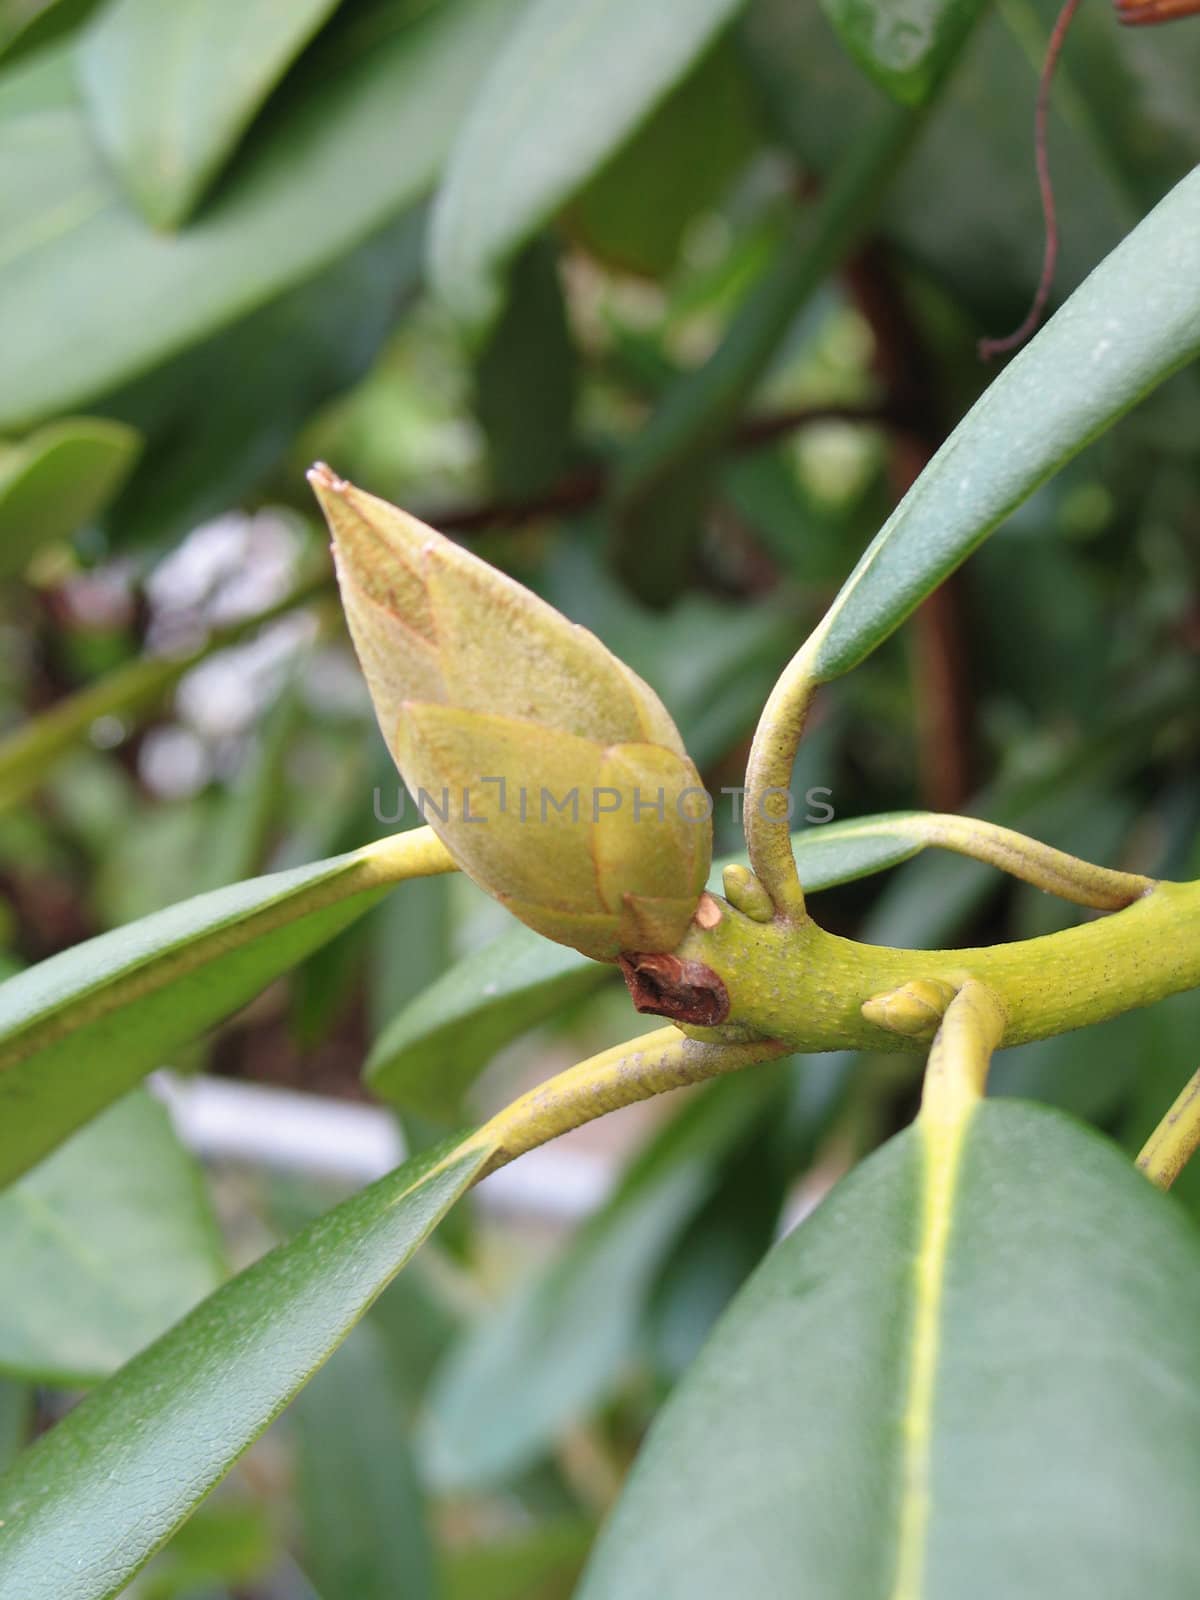 rhododendron flower buds by mmm